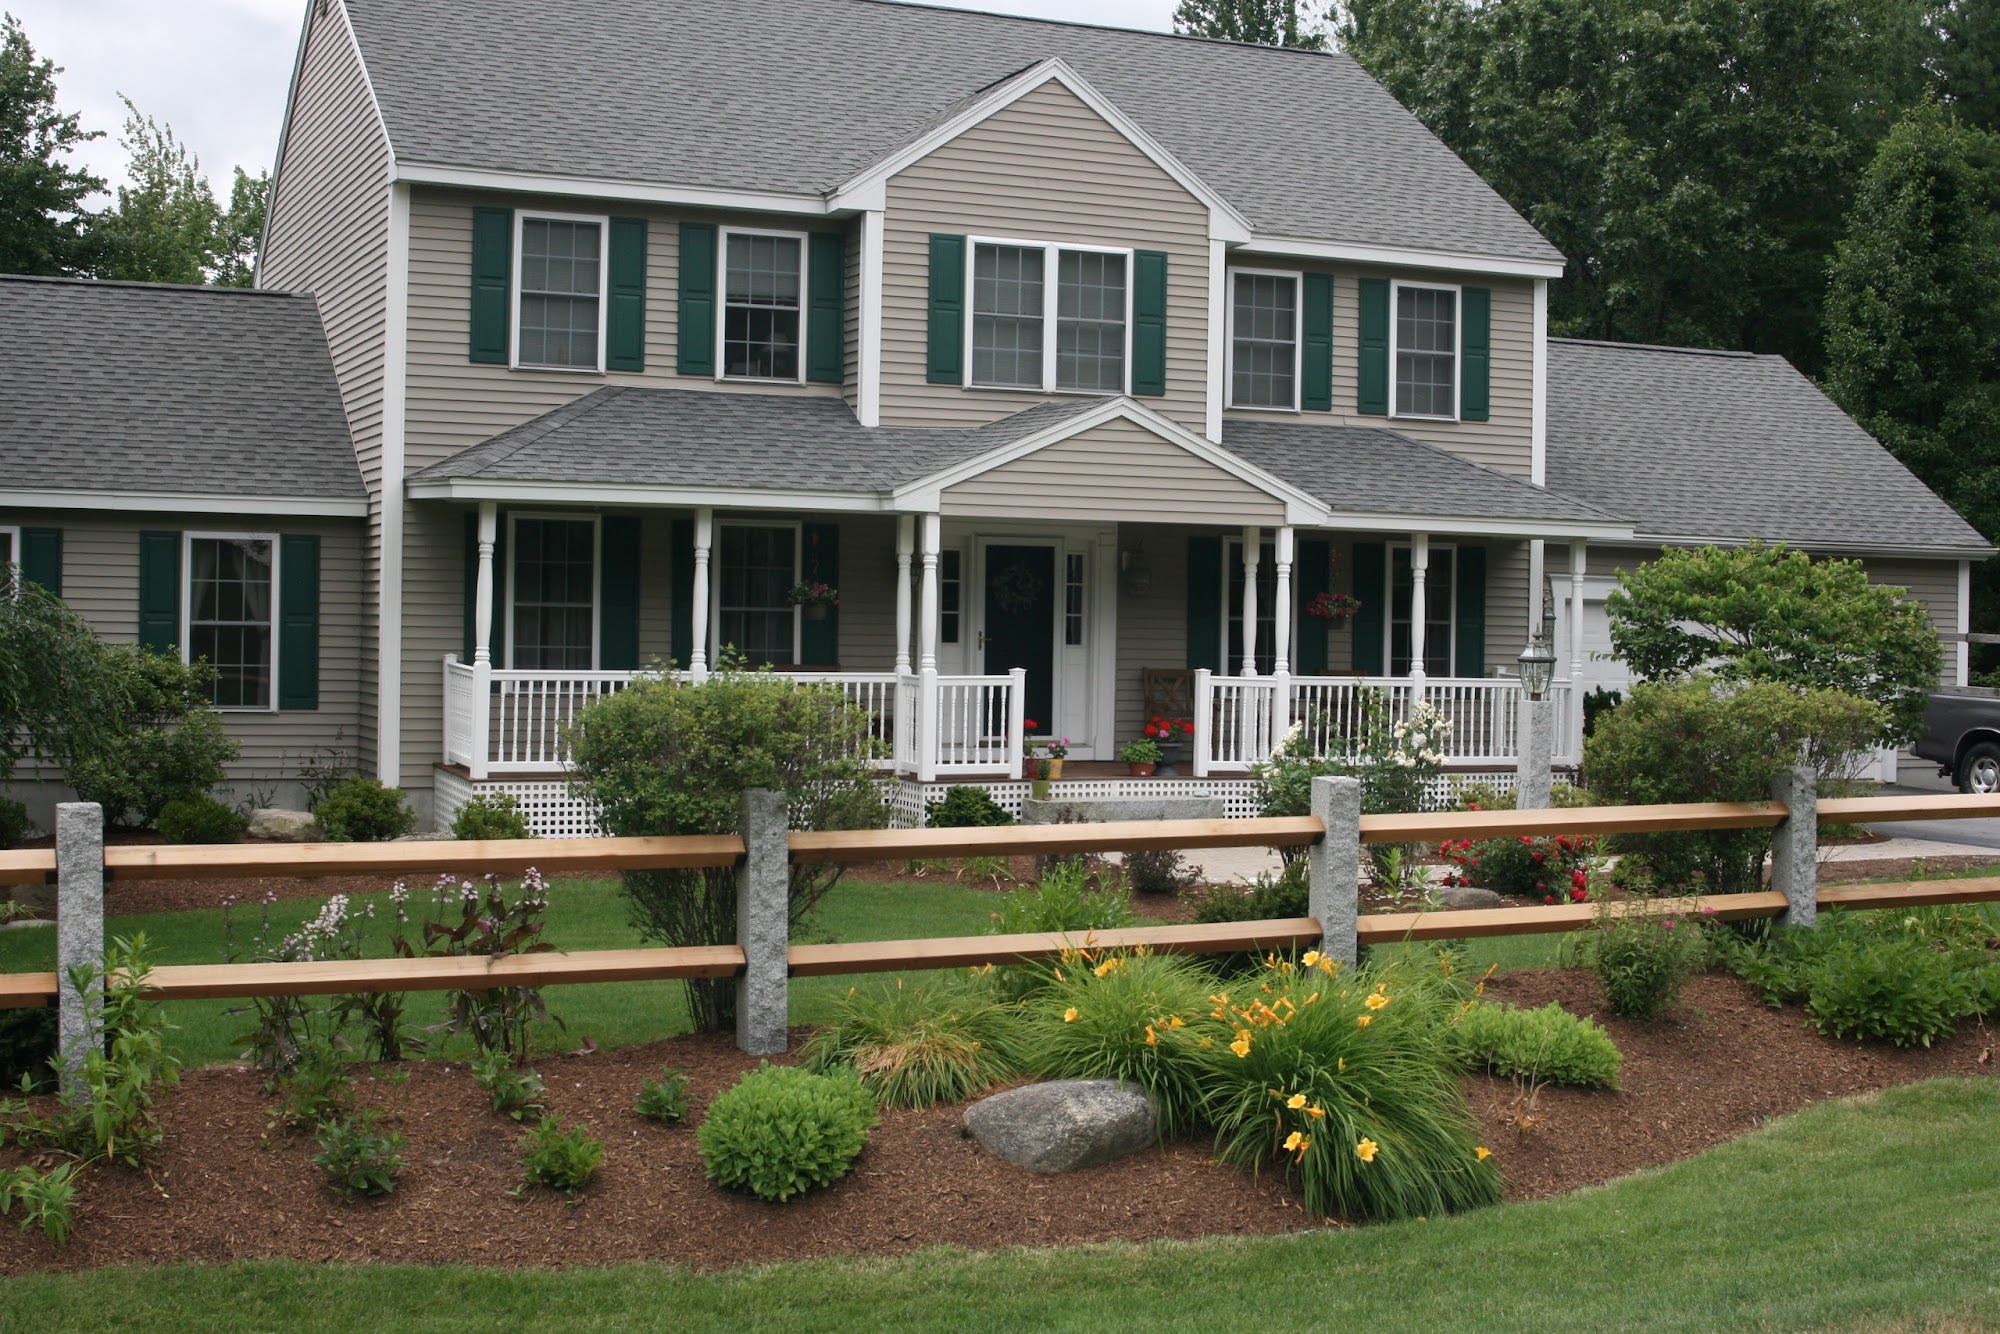 Tasker Landscaping 286 Chichester Rd, Loudon New Hampshire 03307